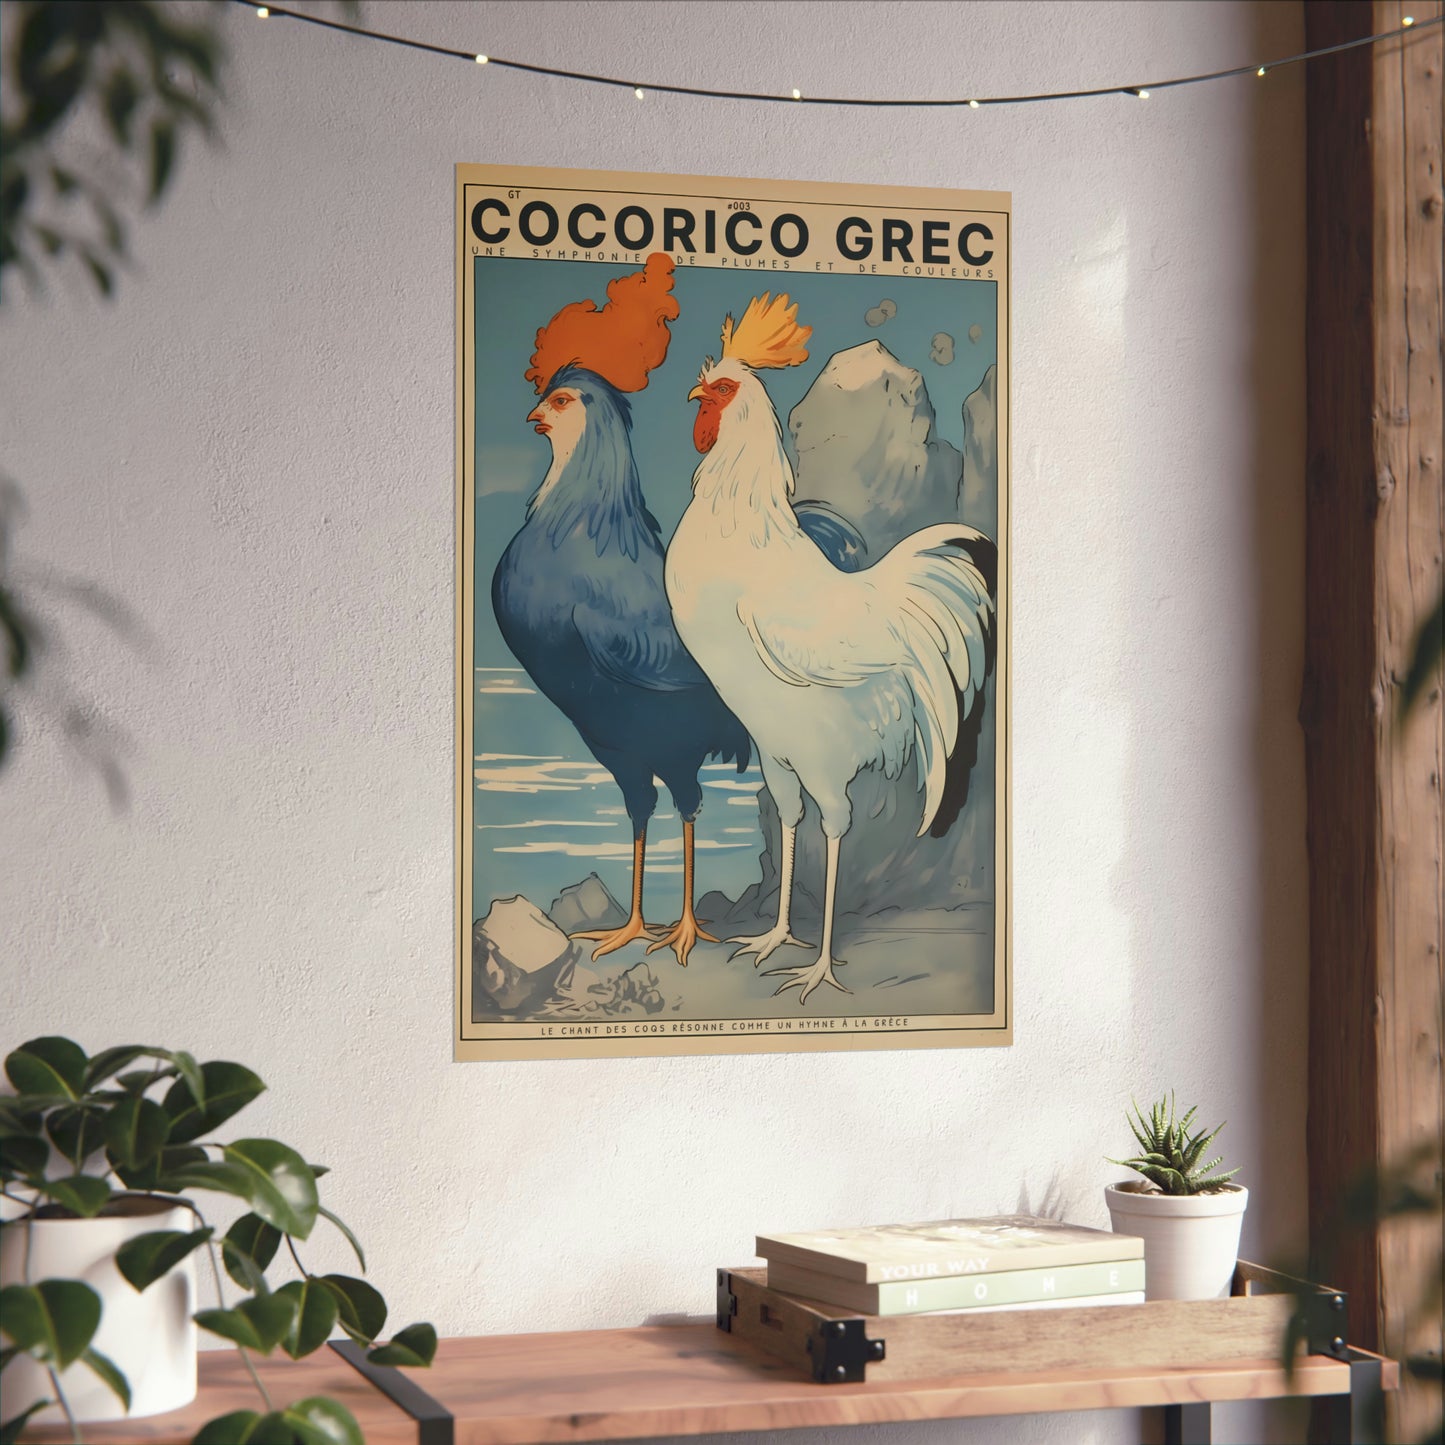 Color Retro Poster Wall Art from Greece by George Tatakis | Twin Roosters with blue sky - modern room